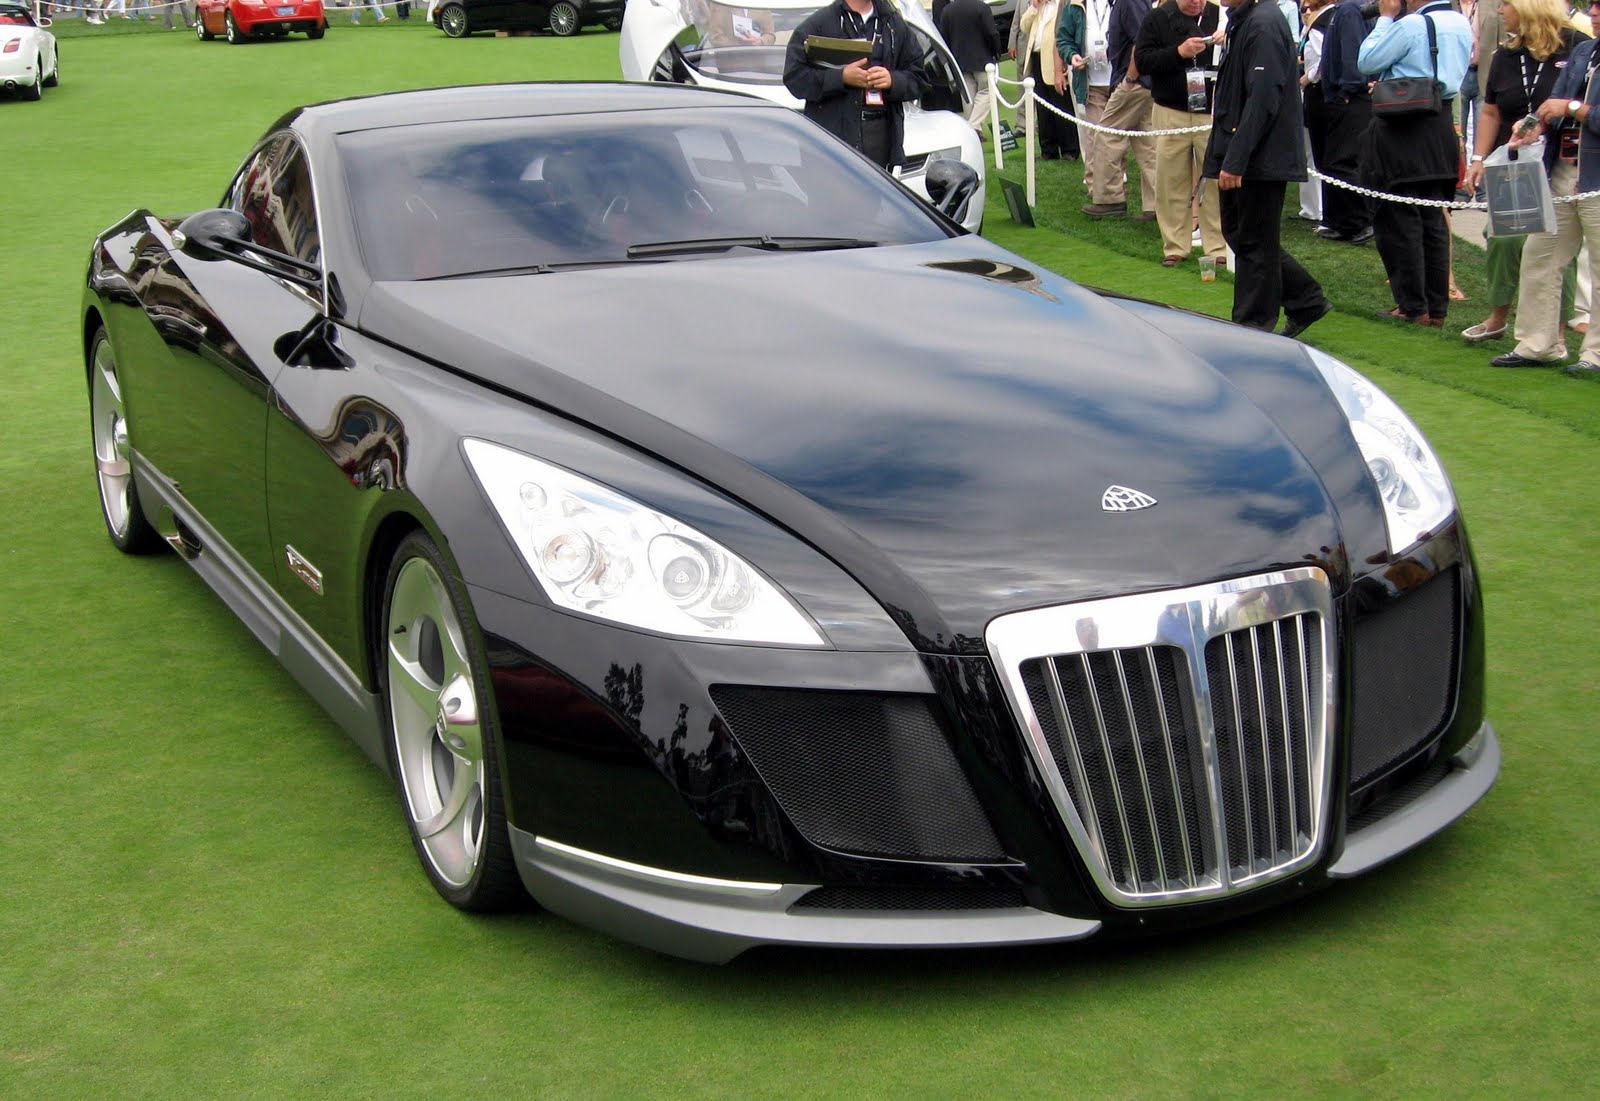 1001Archives: What39;s the most expensive car in the world?